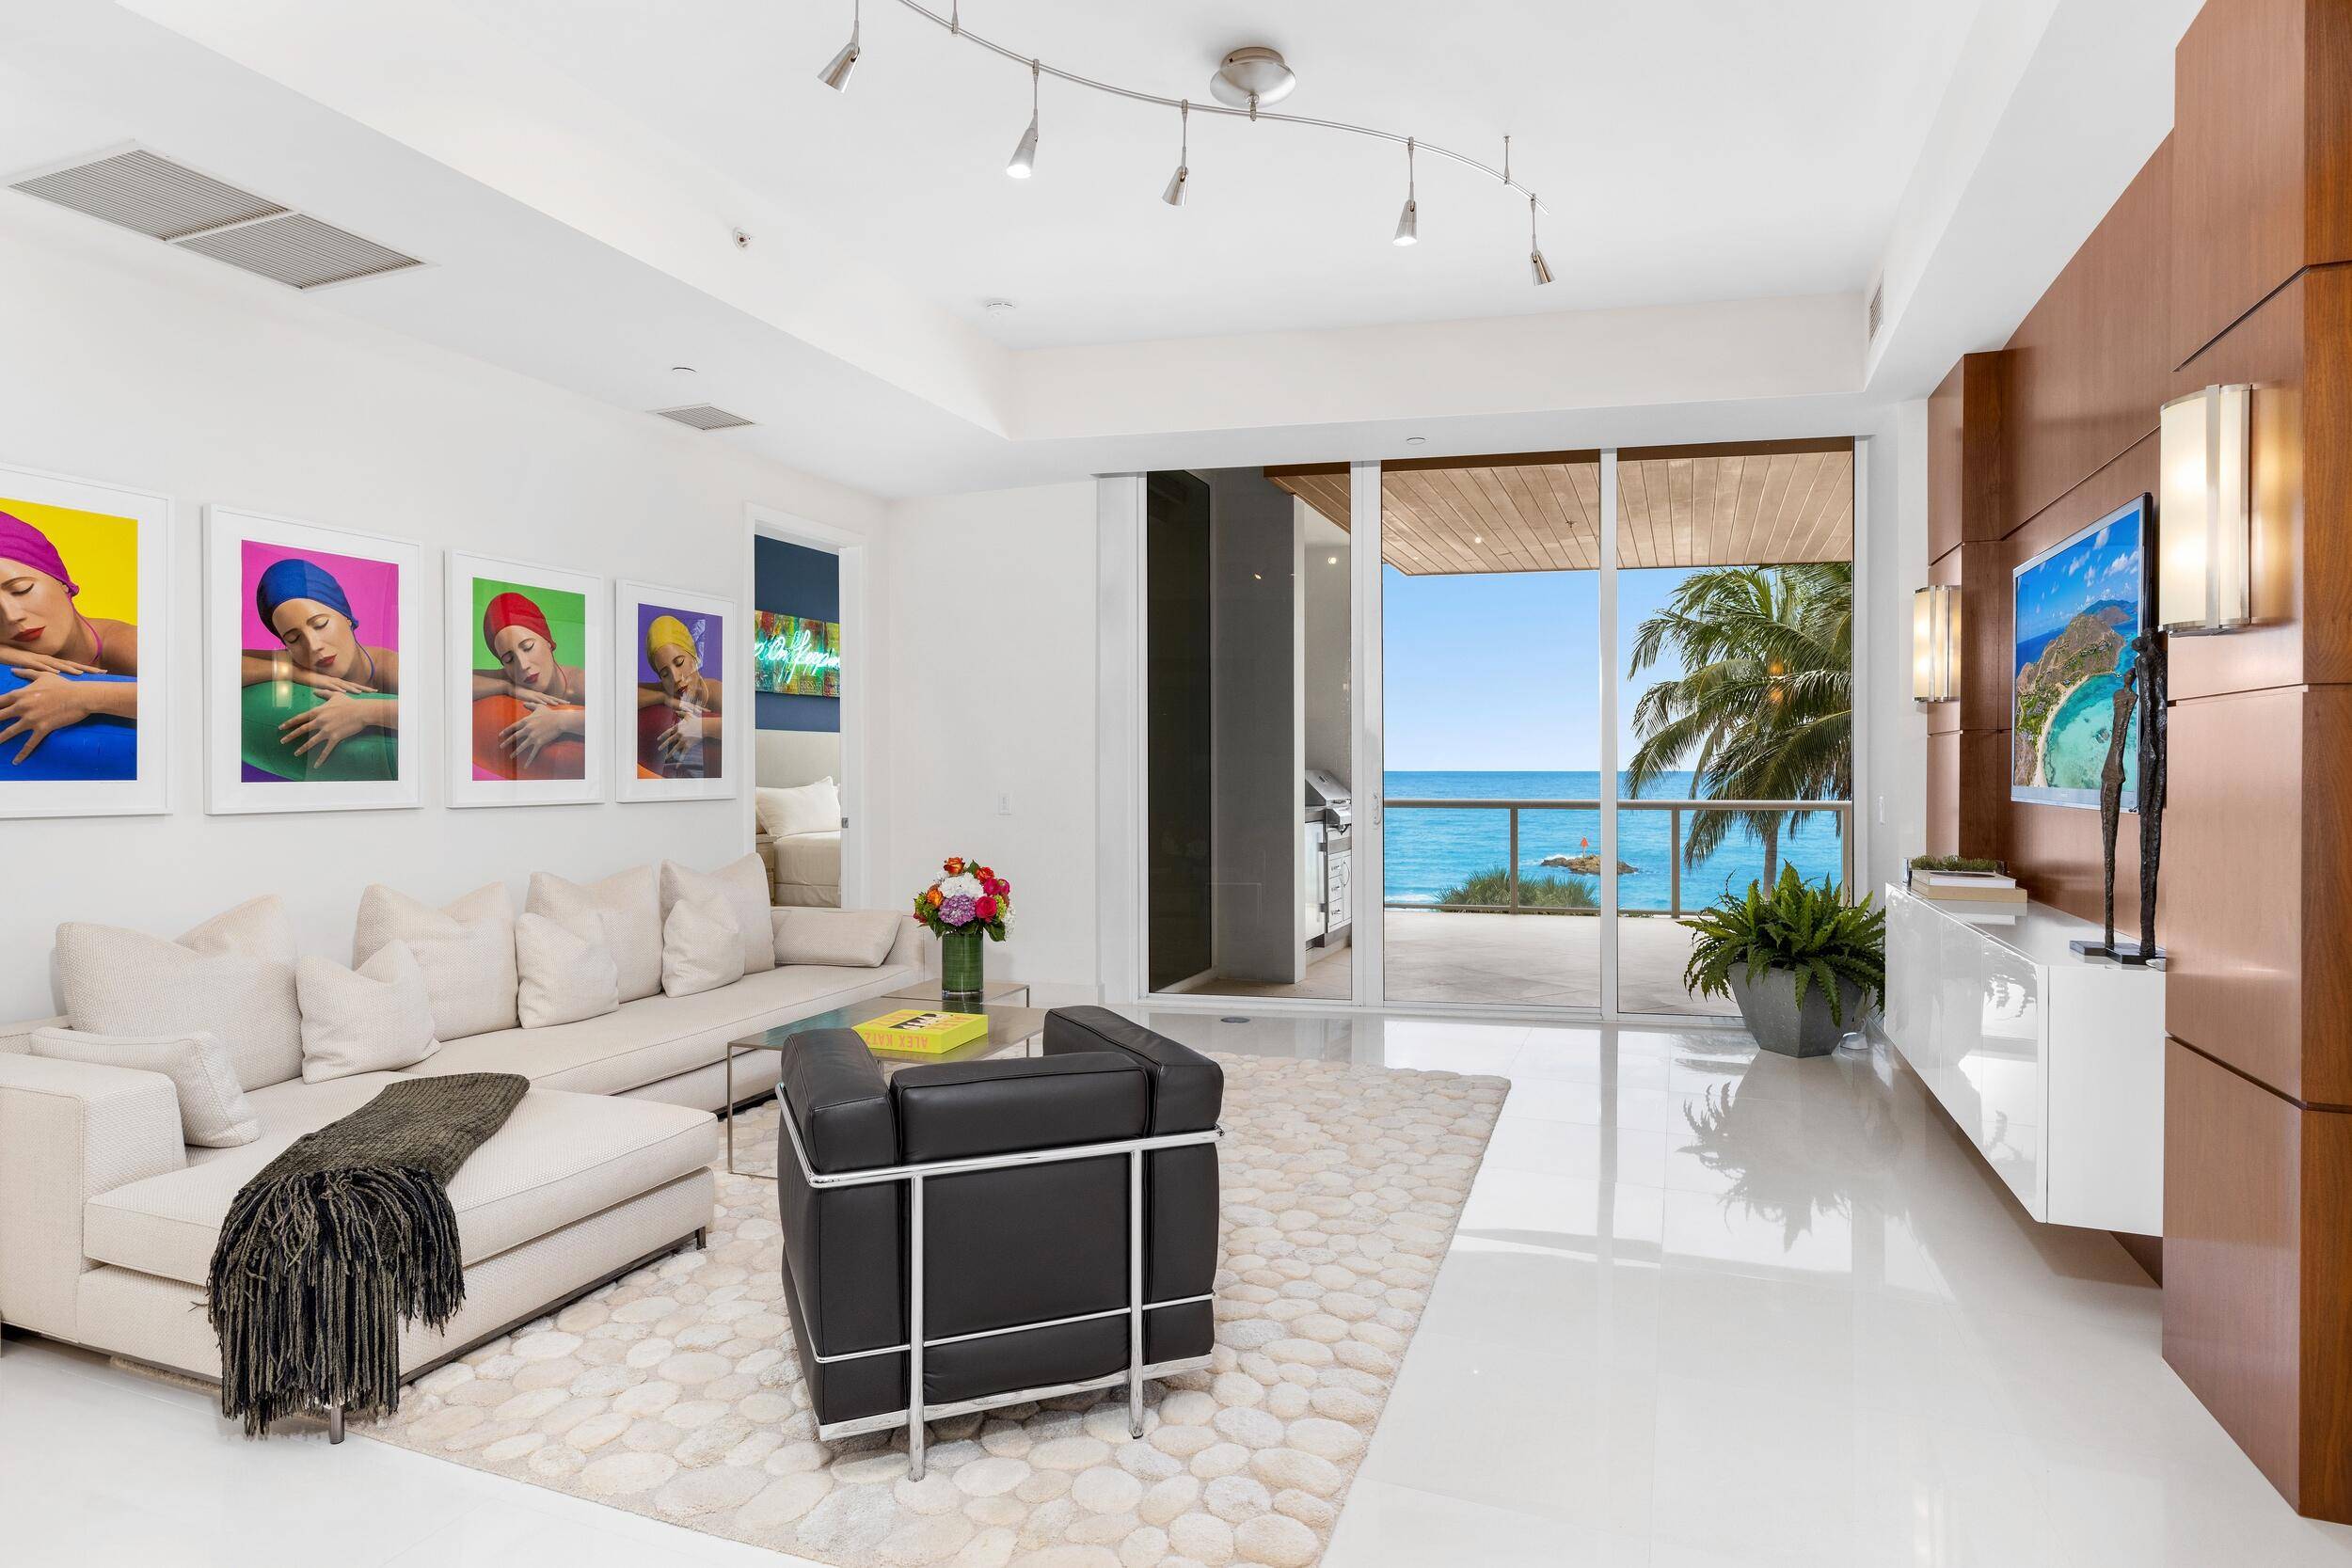 Transcend the expected at this contemporary masterpiece brilliantly staged at One Thousand Ocean in Boca Raton.